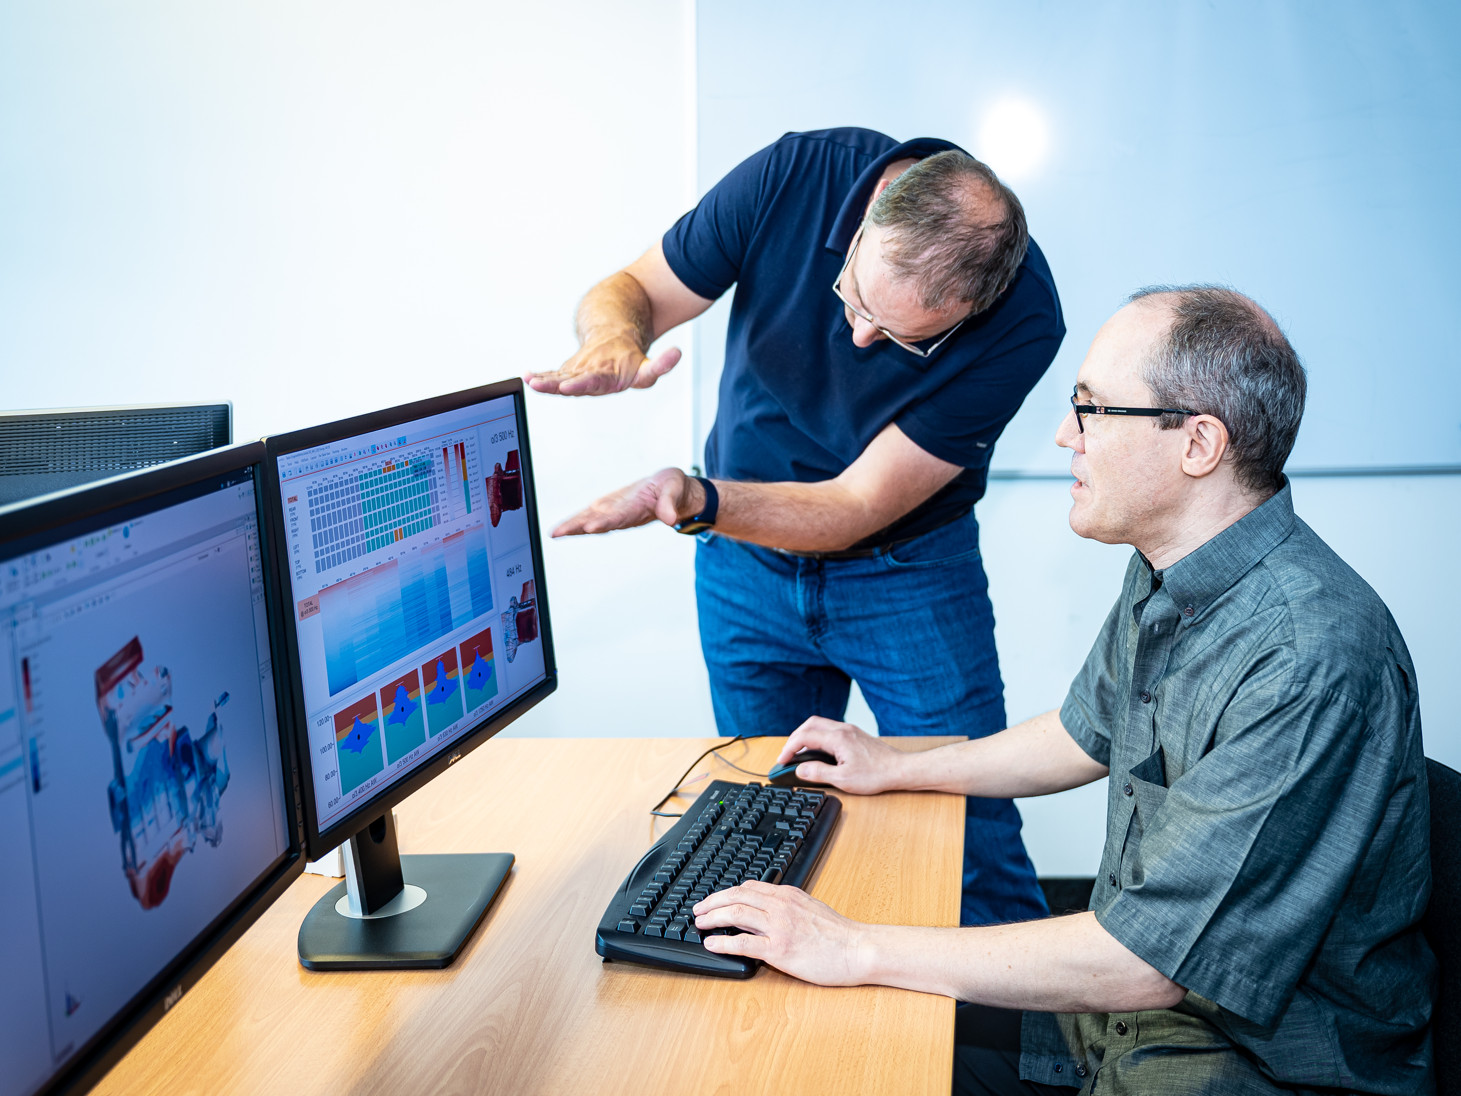 Two researchers discuss noise simulation visualizations used in engine development, which are displayed on two screens. 